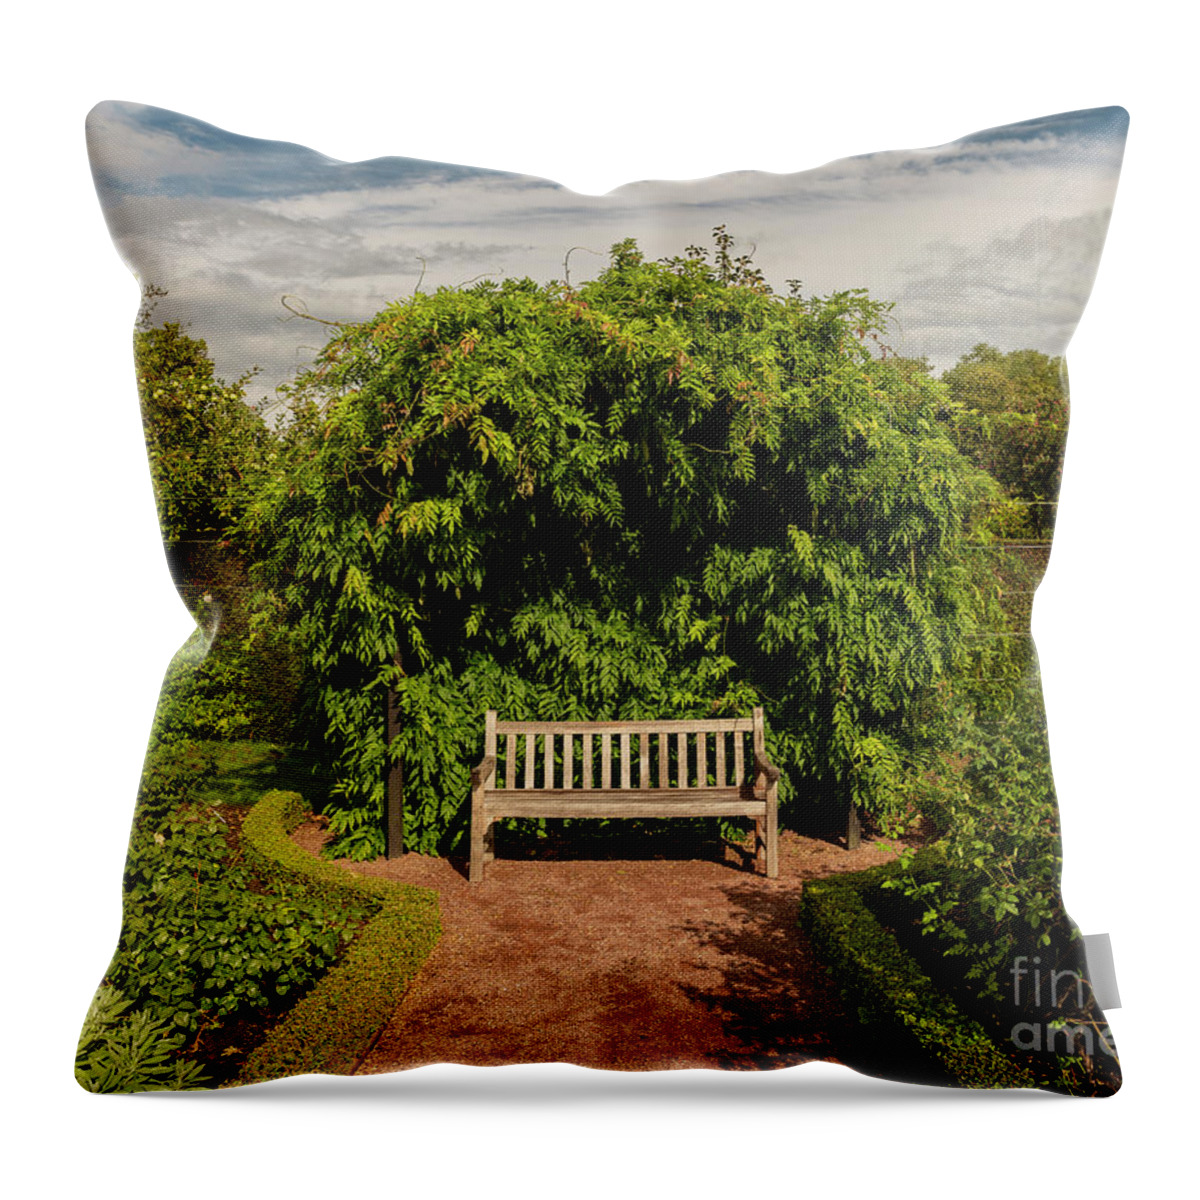 Hedge Throw Pillow featuring the photograph Wooden garden bench by Sophie McAulay